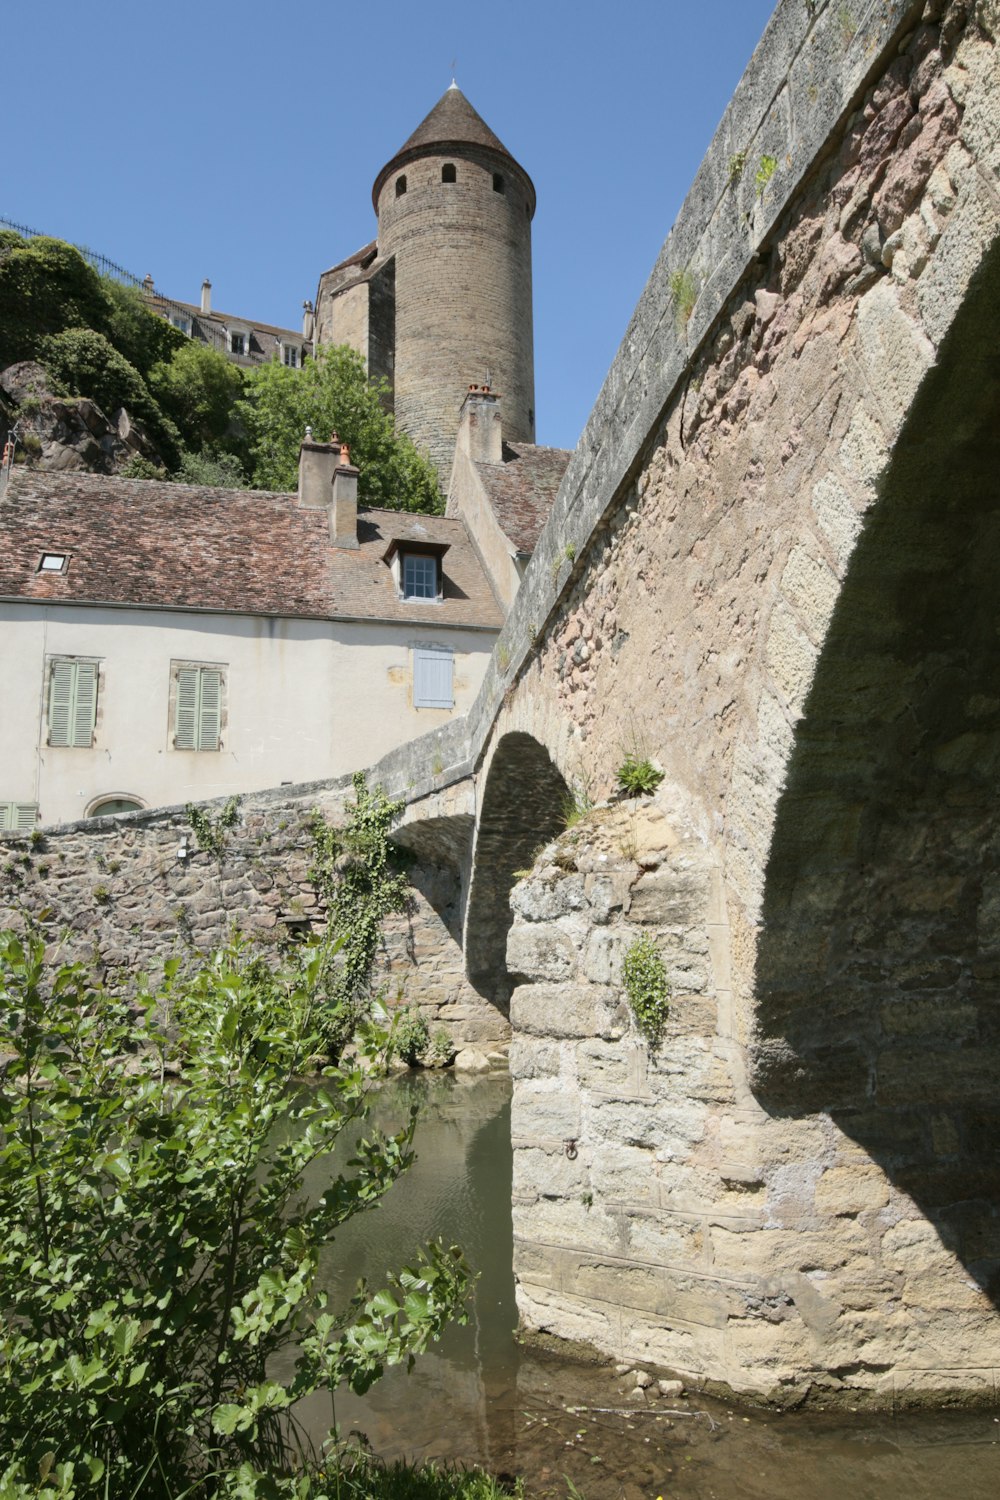 a stone bridge over a river with a castle in the background